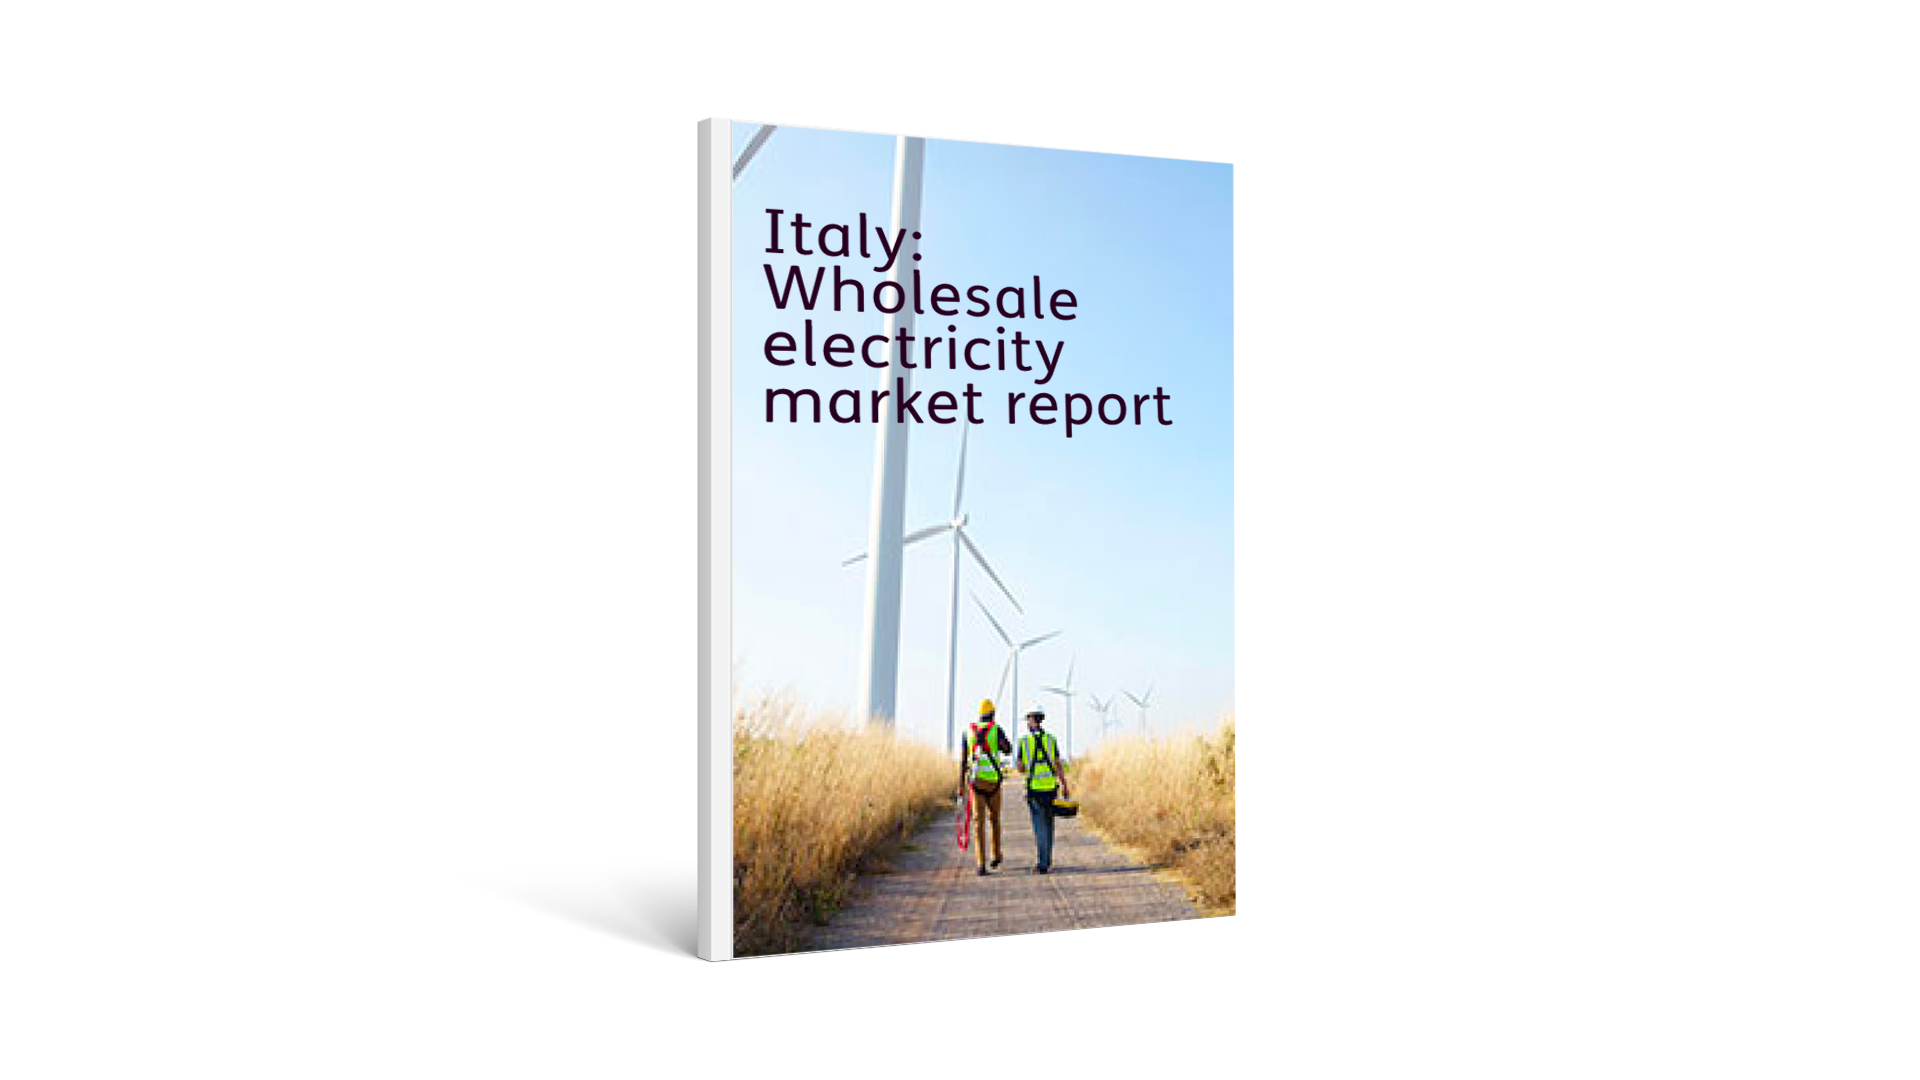 Italy: Wholesale electricity market report